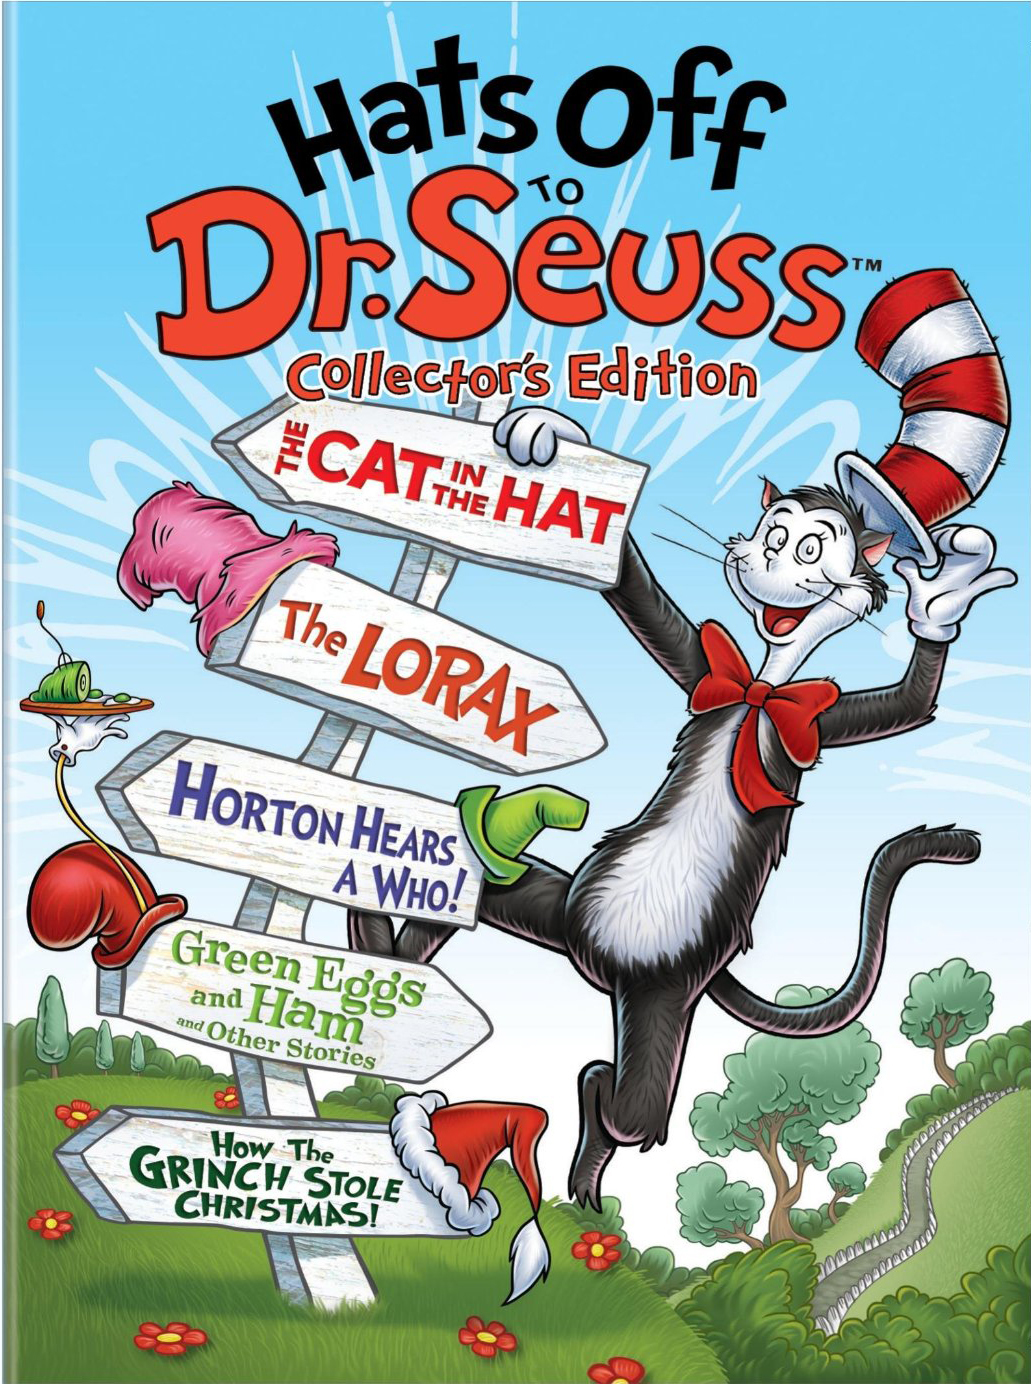 Hats Off to Dr. Suess